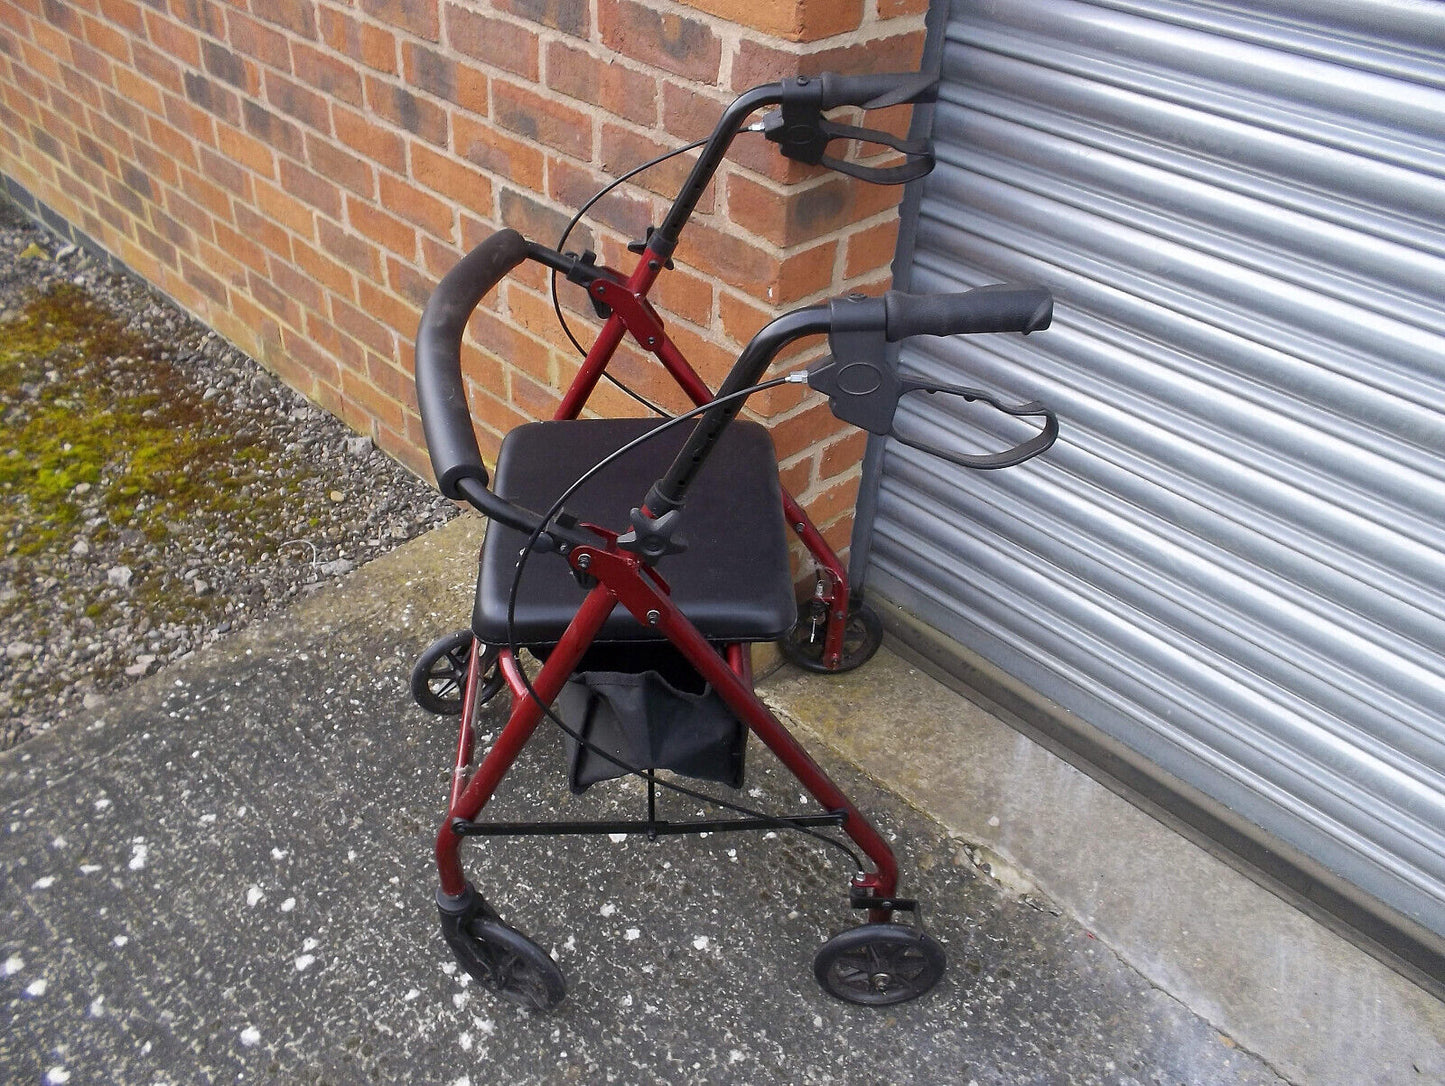 Care Co R8RD-59 R8 Aluminium Rollator 6" Wheels, Fold Up Removable Back Support